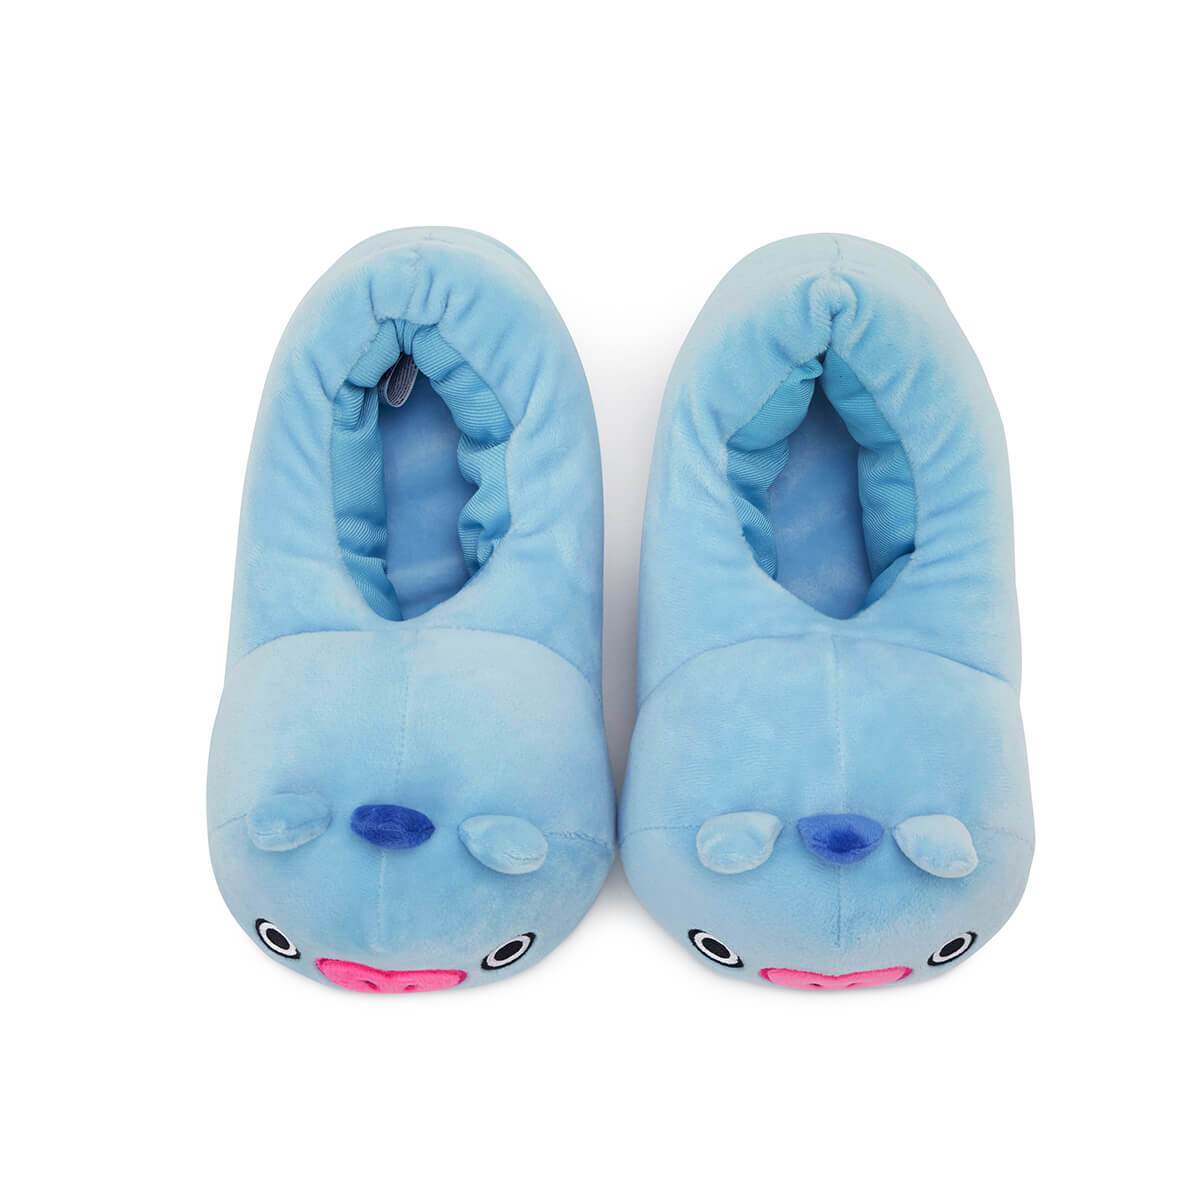 BT21 MANG Plush Indoor Slippers